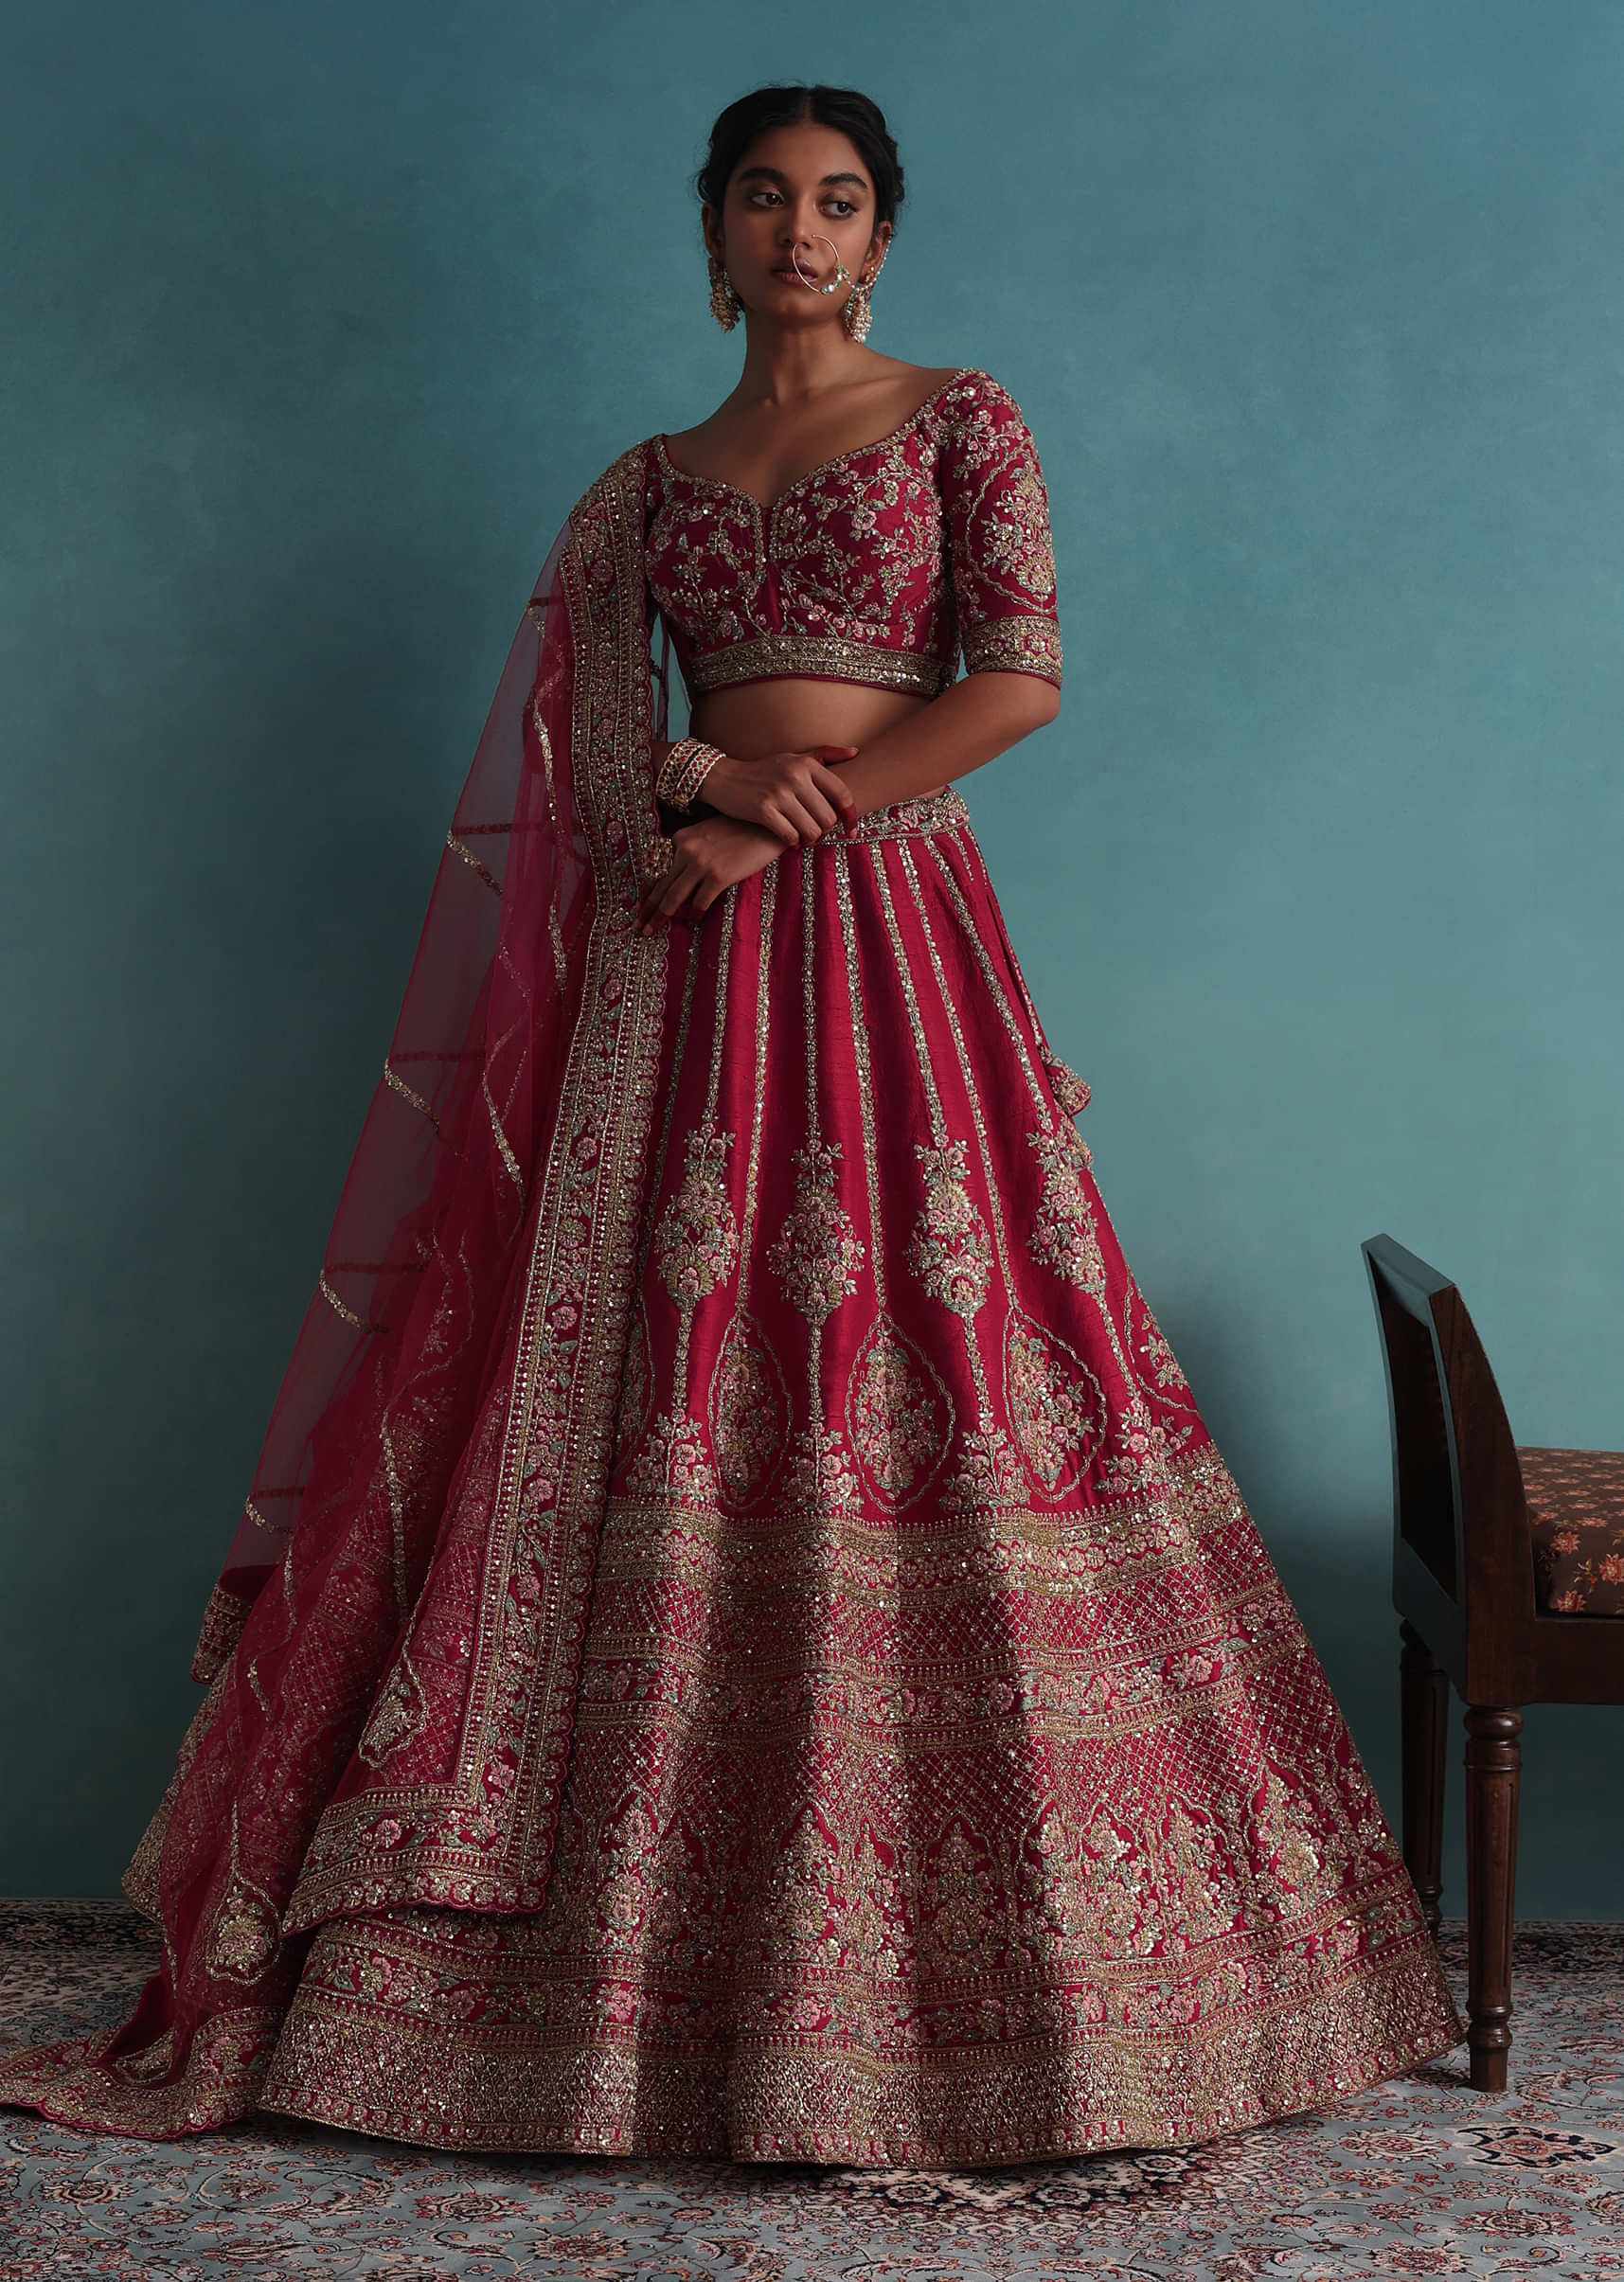 Tomato Red Embroidered 16 Kali Bridal Lehenga In Raw Silk With Floral Hand Embroidery